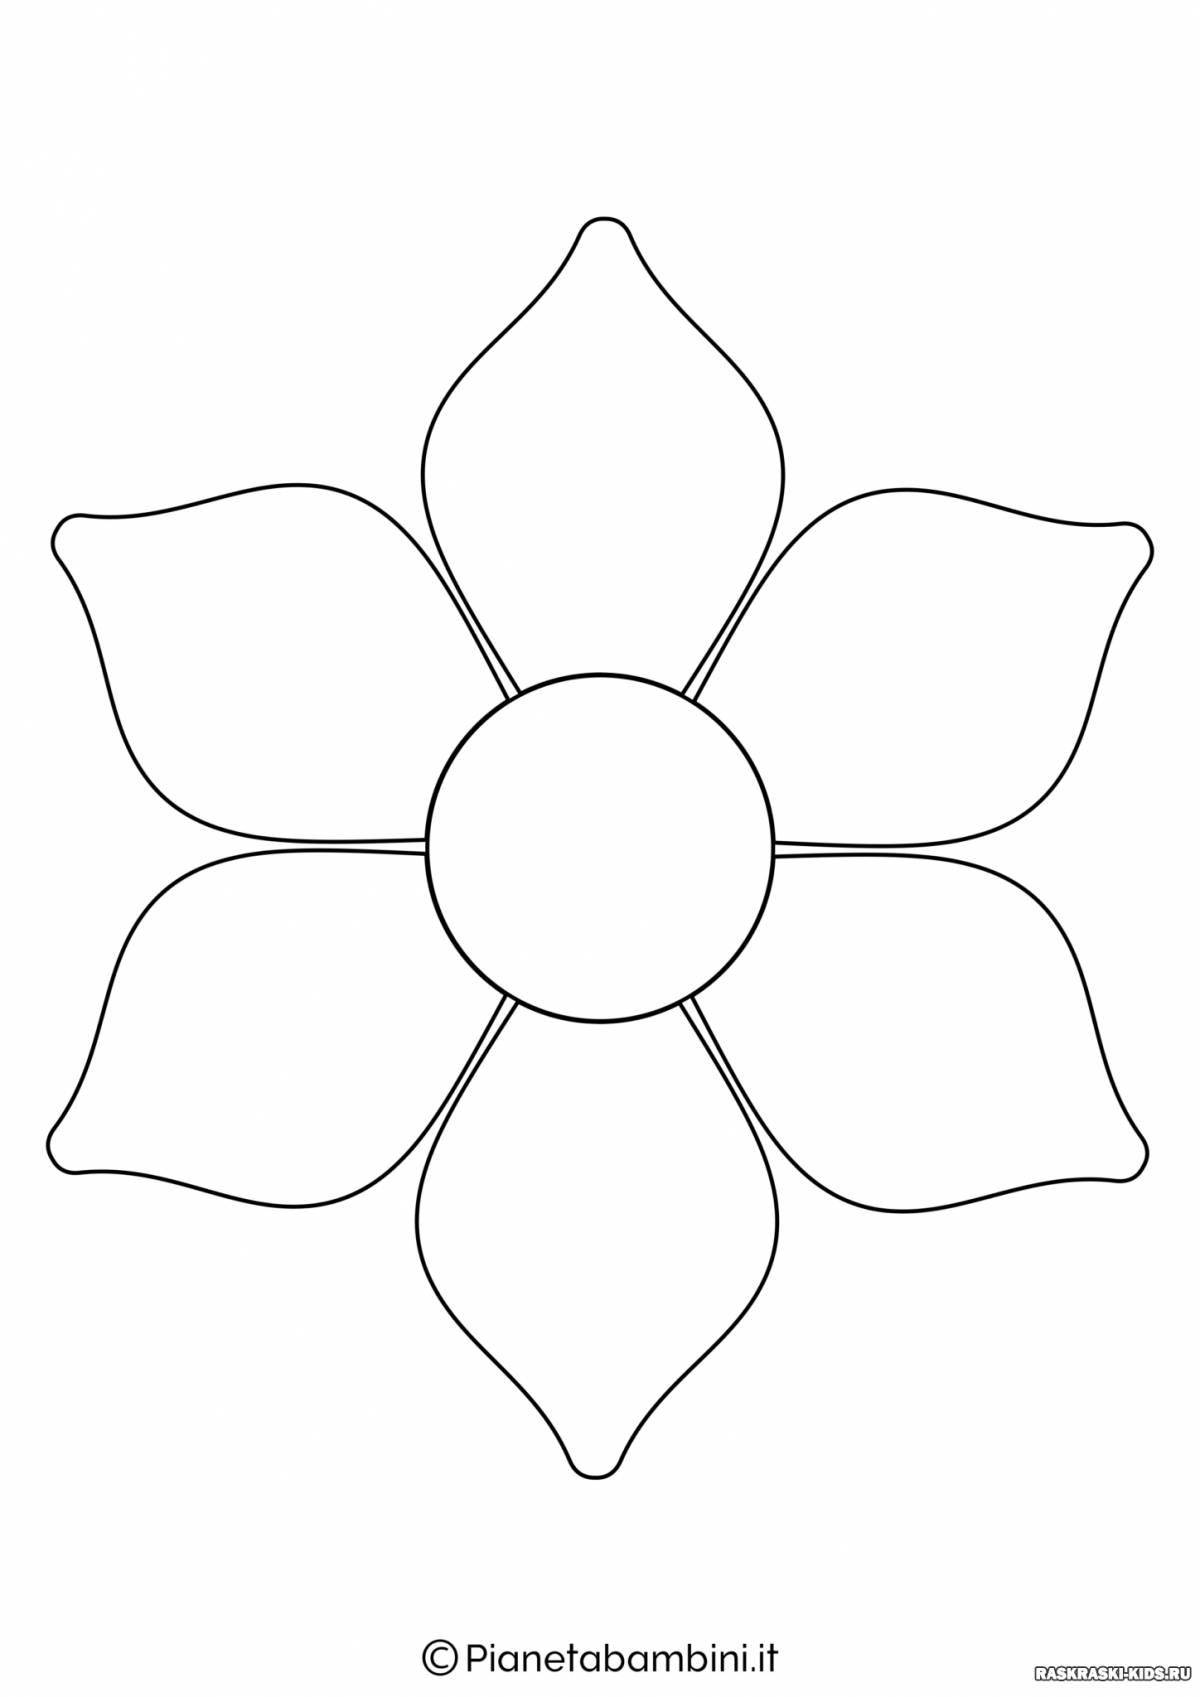 Inspirational flower pattern coloring page